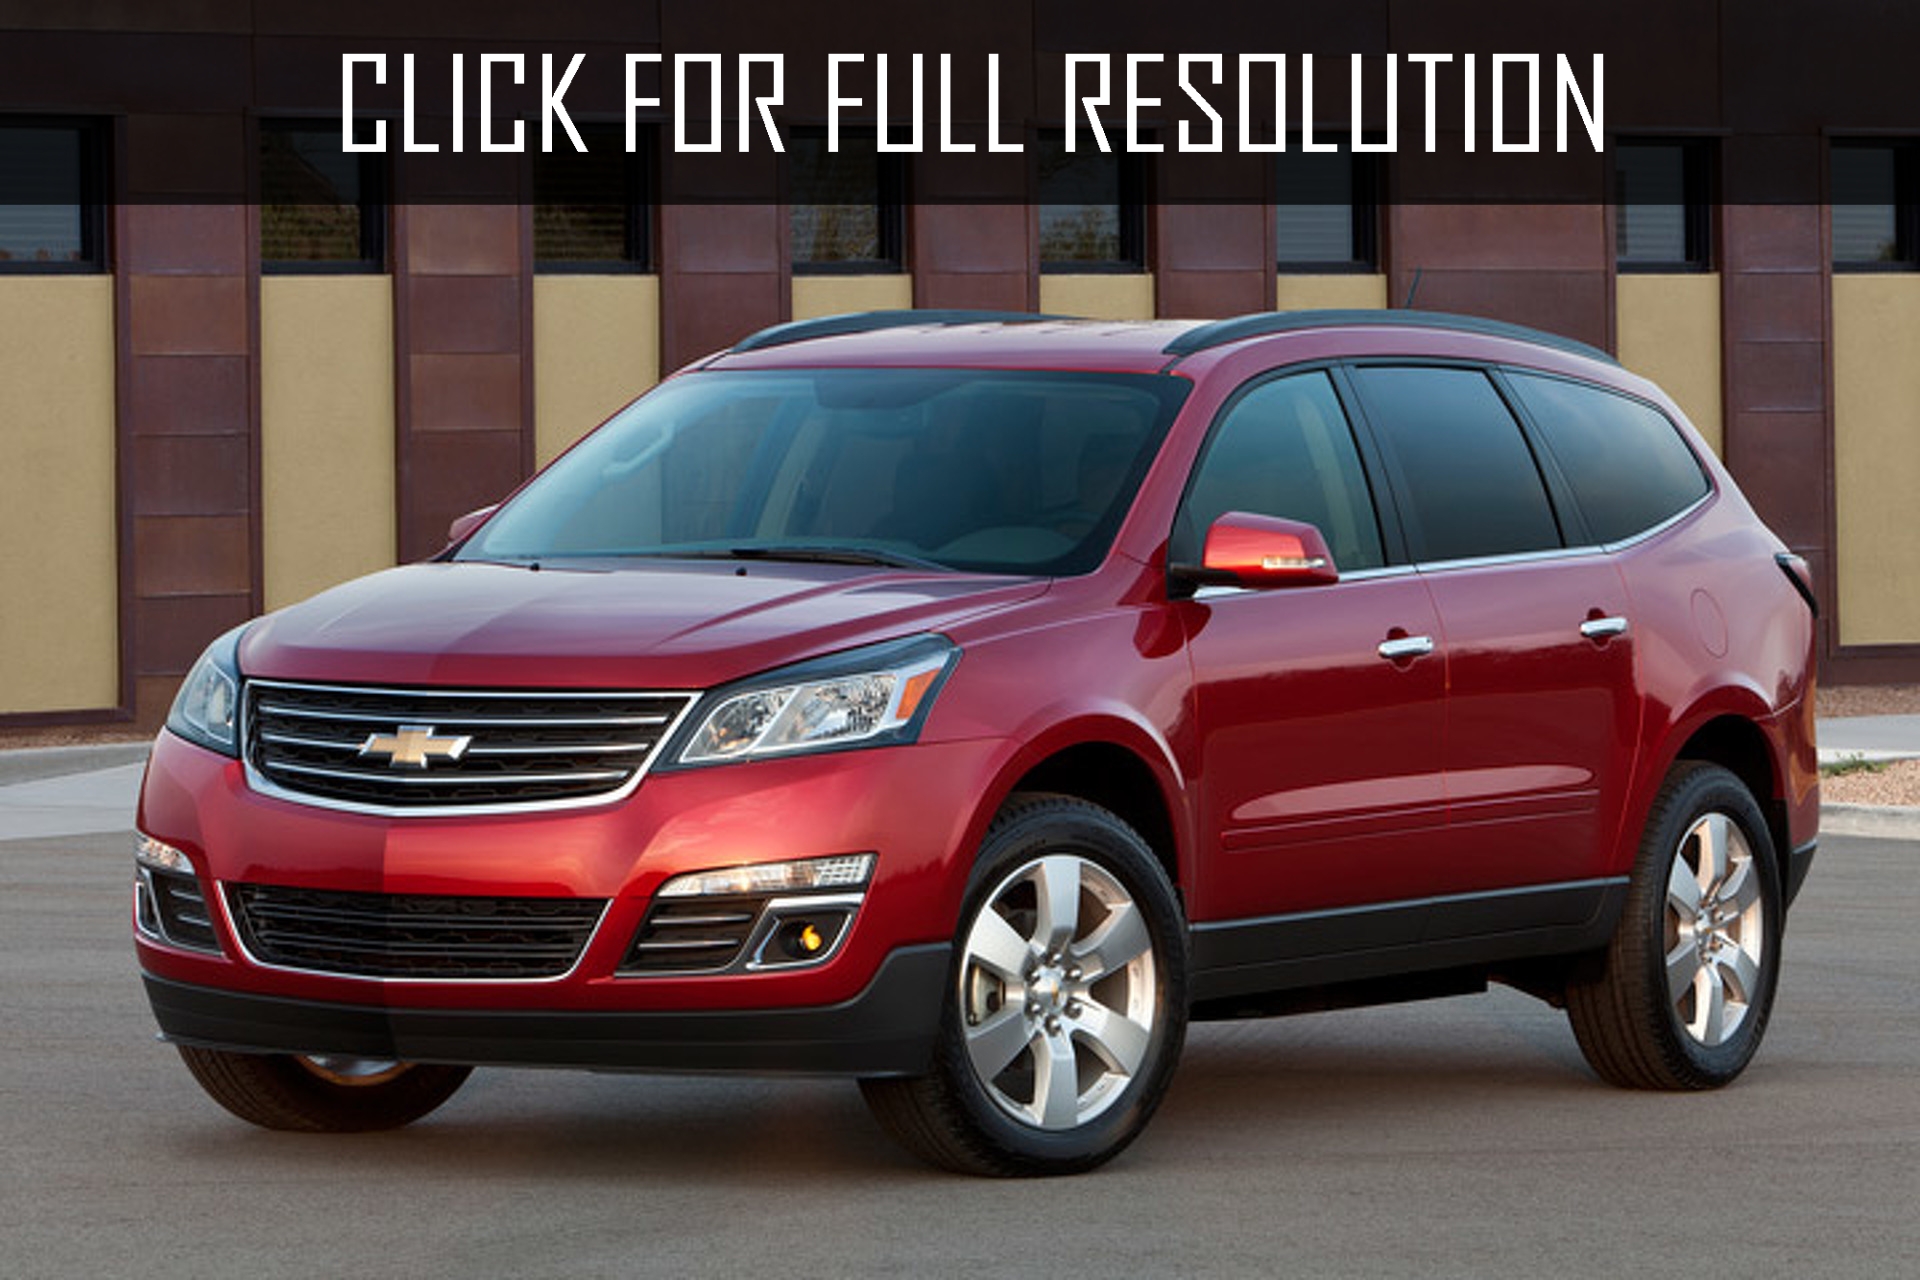 Chevrolet Suv Crossover amazing photo gallery, some information and